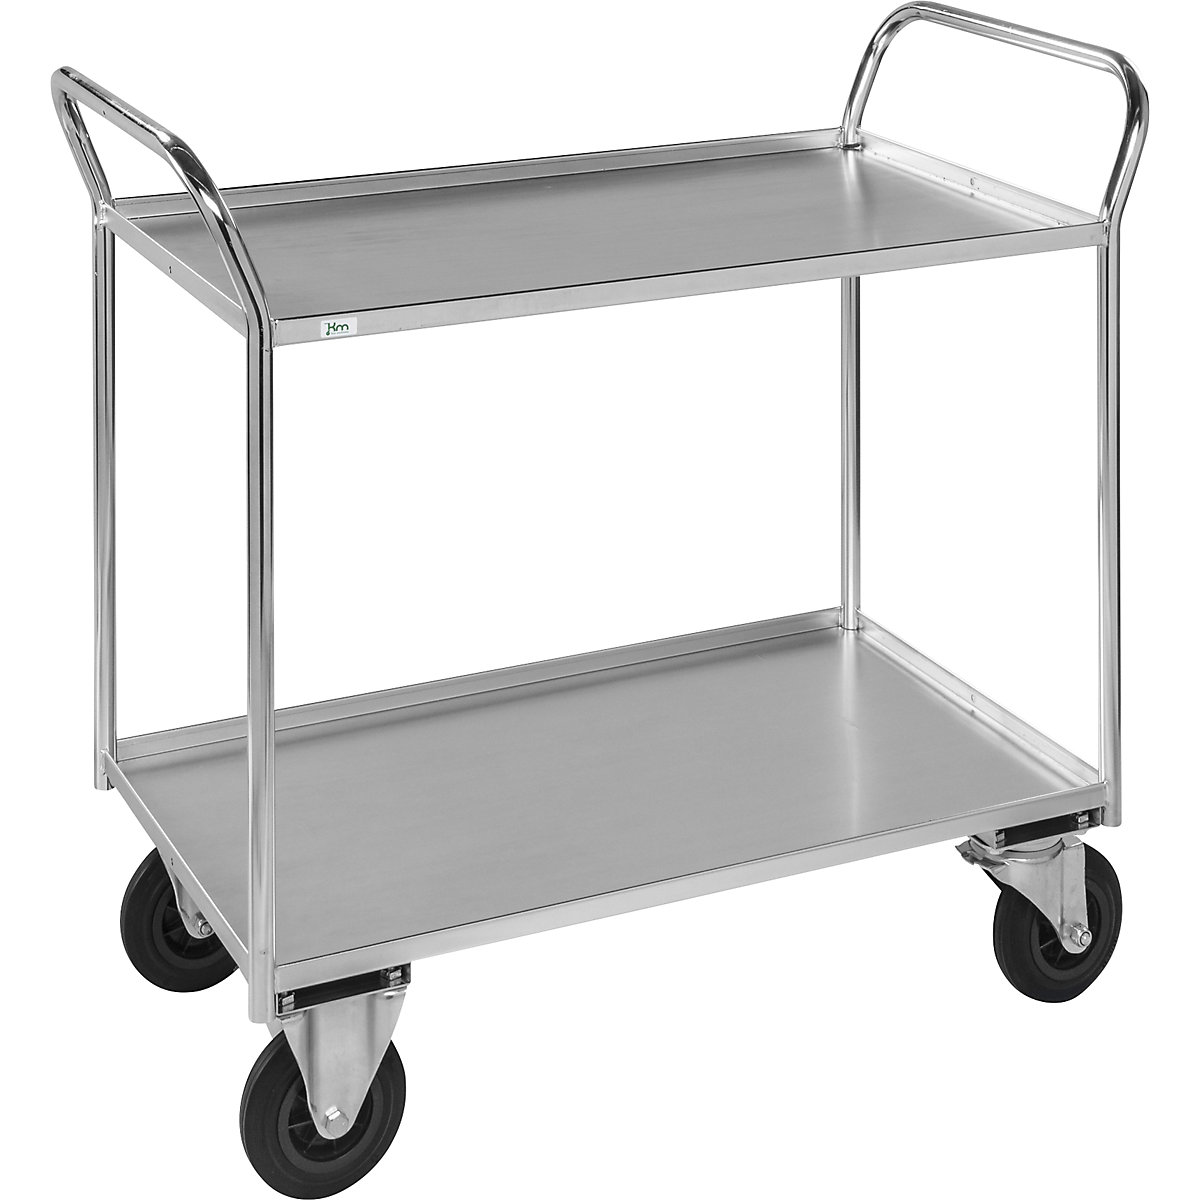 KM41 table trolley – Kongamek, 2 shelves with raised edges, LxWxH 1070 x 550 x 1000 mm, zinc plated, 2 swivel castors with stops, 2 fixed castors, 5+ items-1